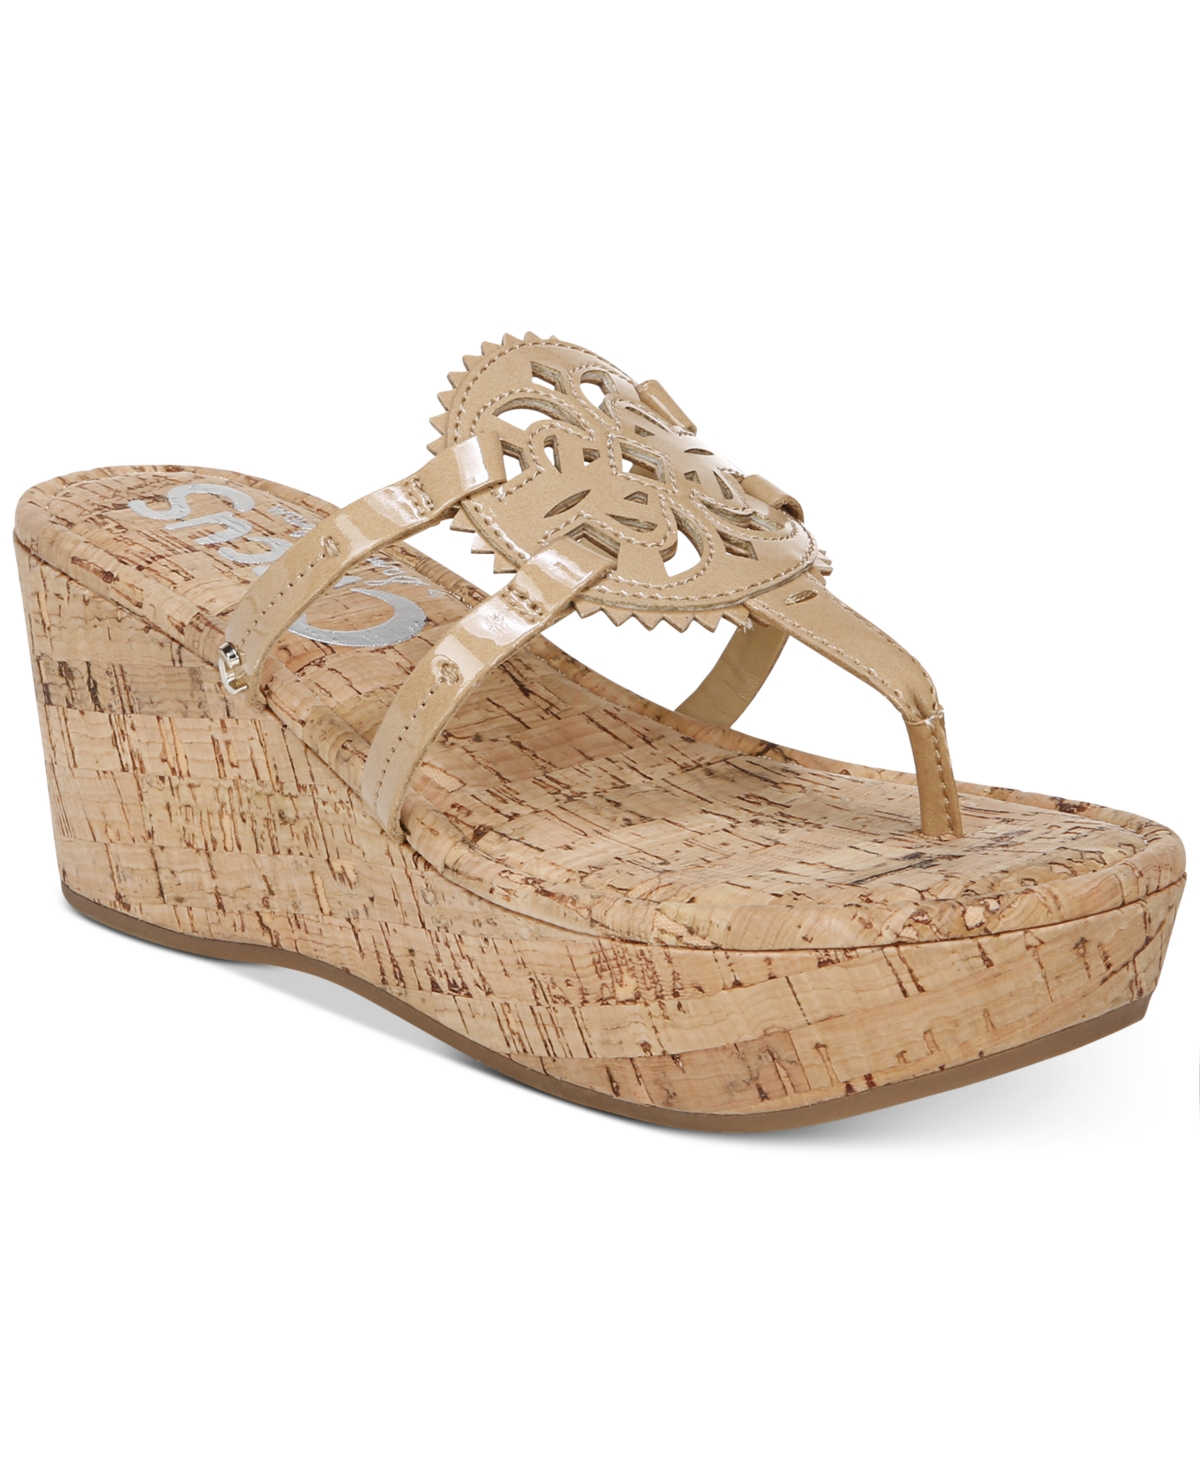 UPC 017114001304 product image for Circus by Sam Edelman Rocky Platform Wedges Women's Shoes | upcitemdb.com